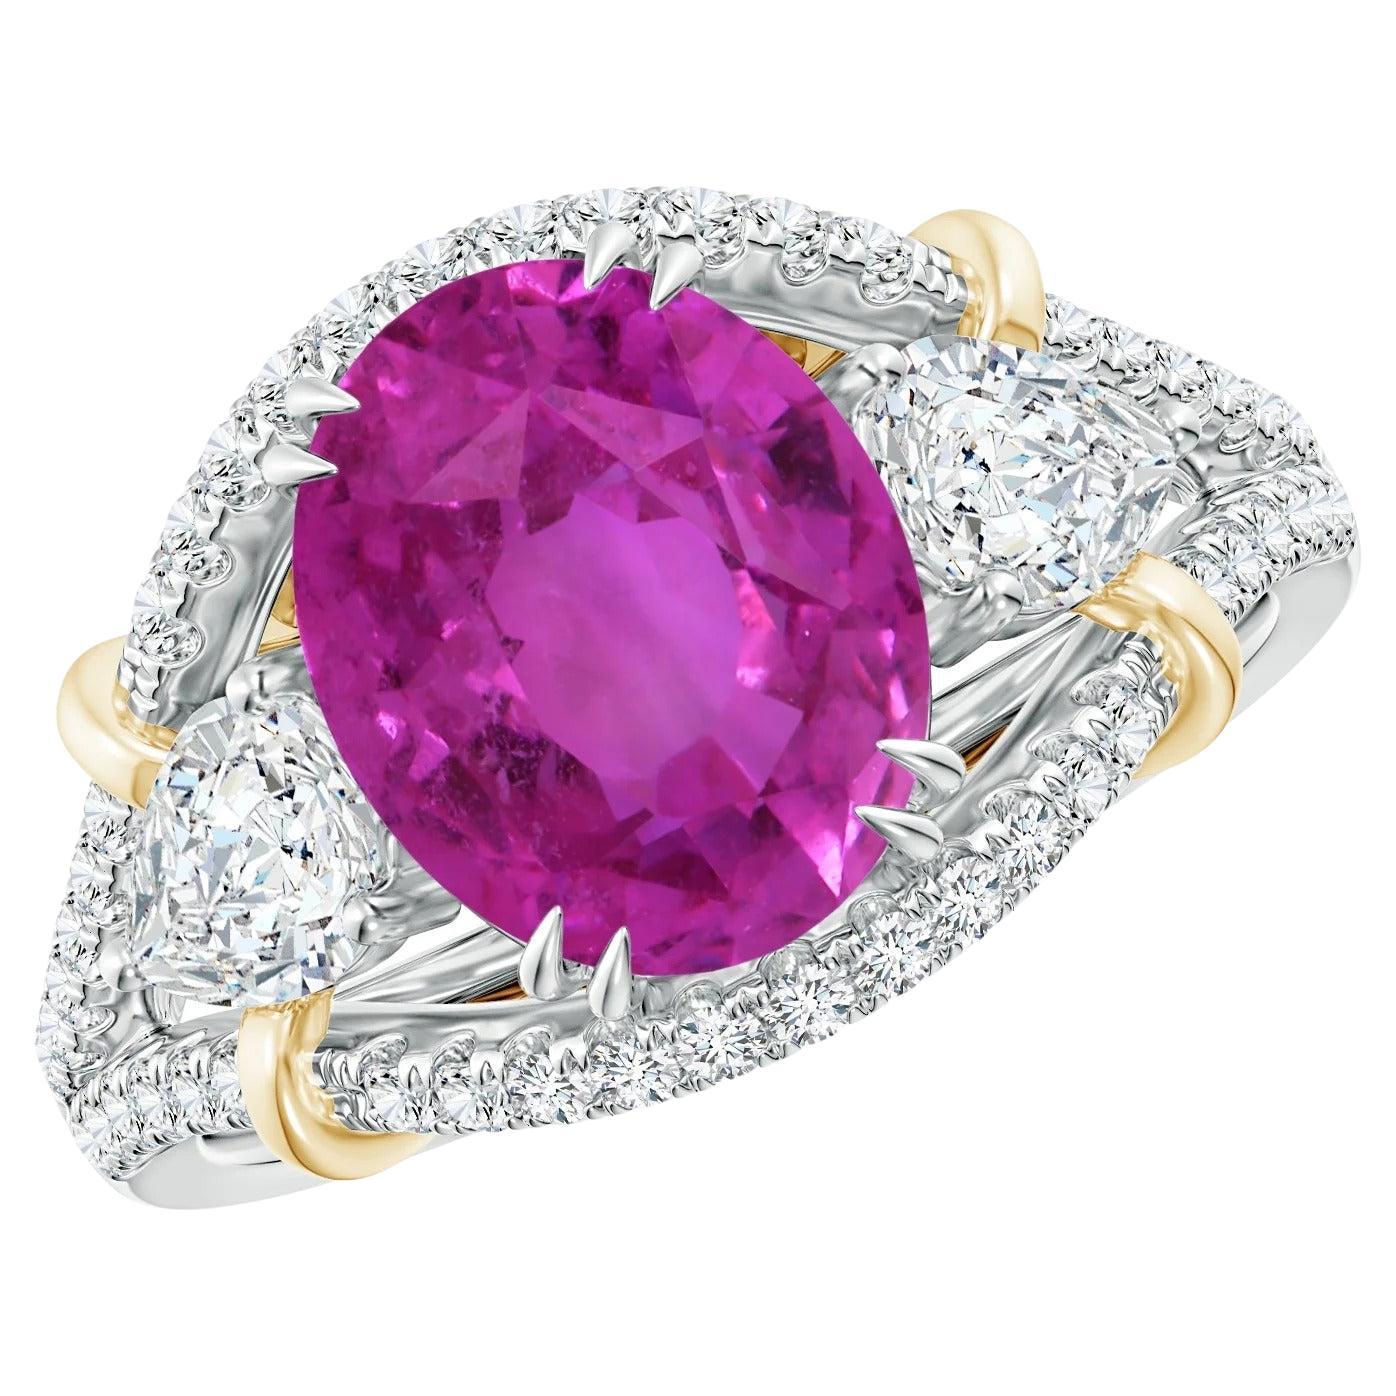 GIA Certified Natural Pink Sapphire Ring in Yellow Gold with Diamonds